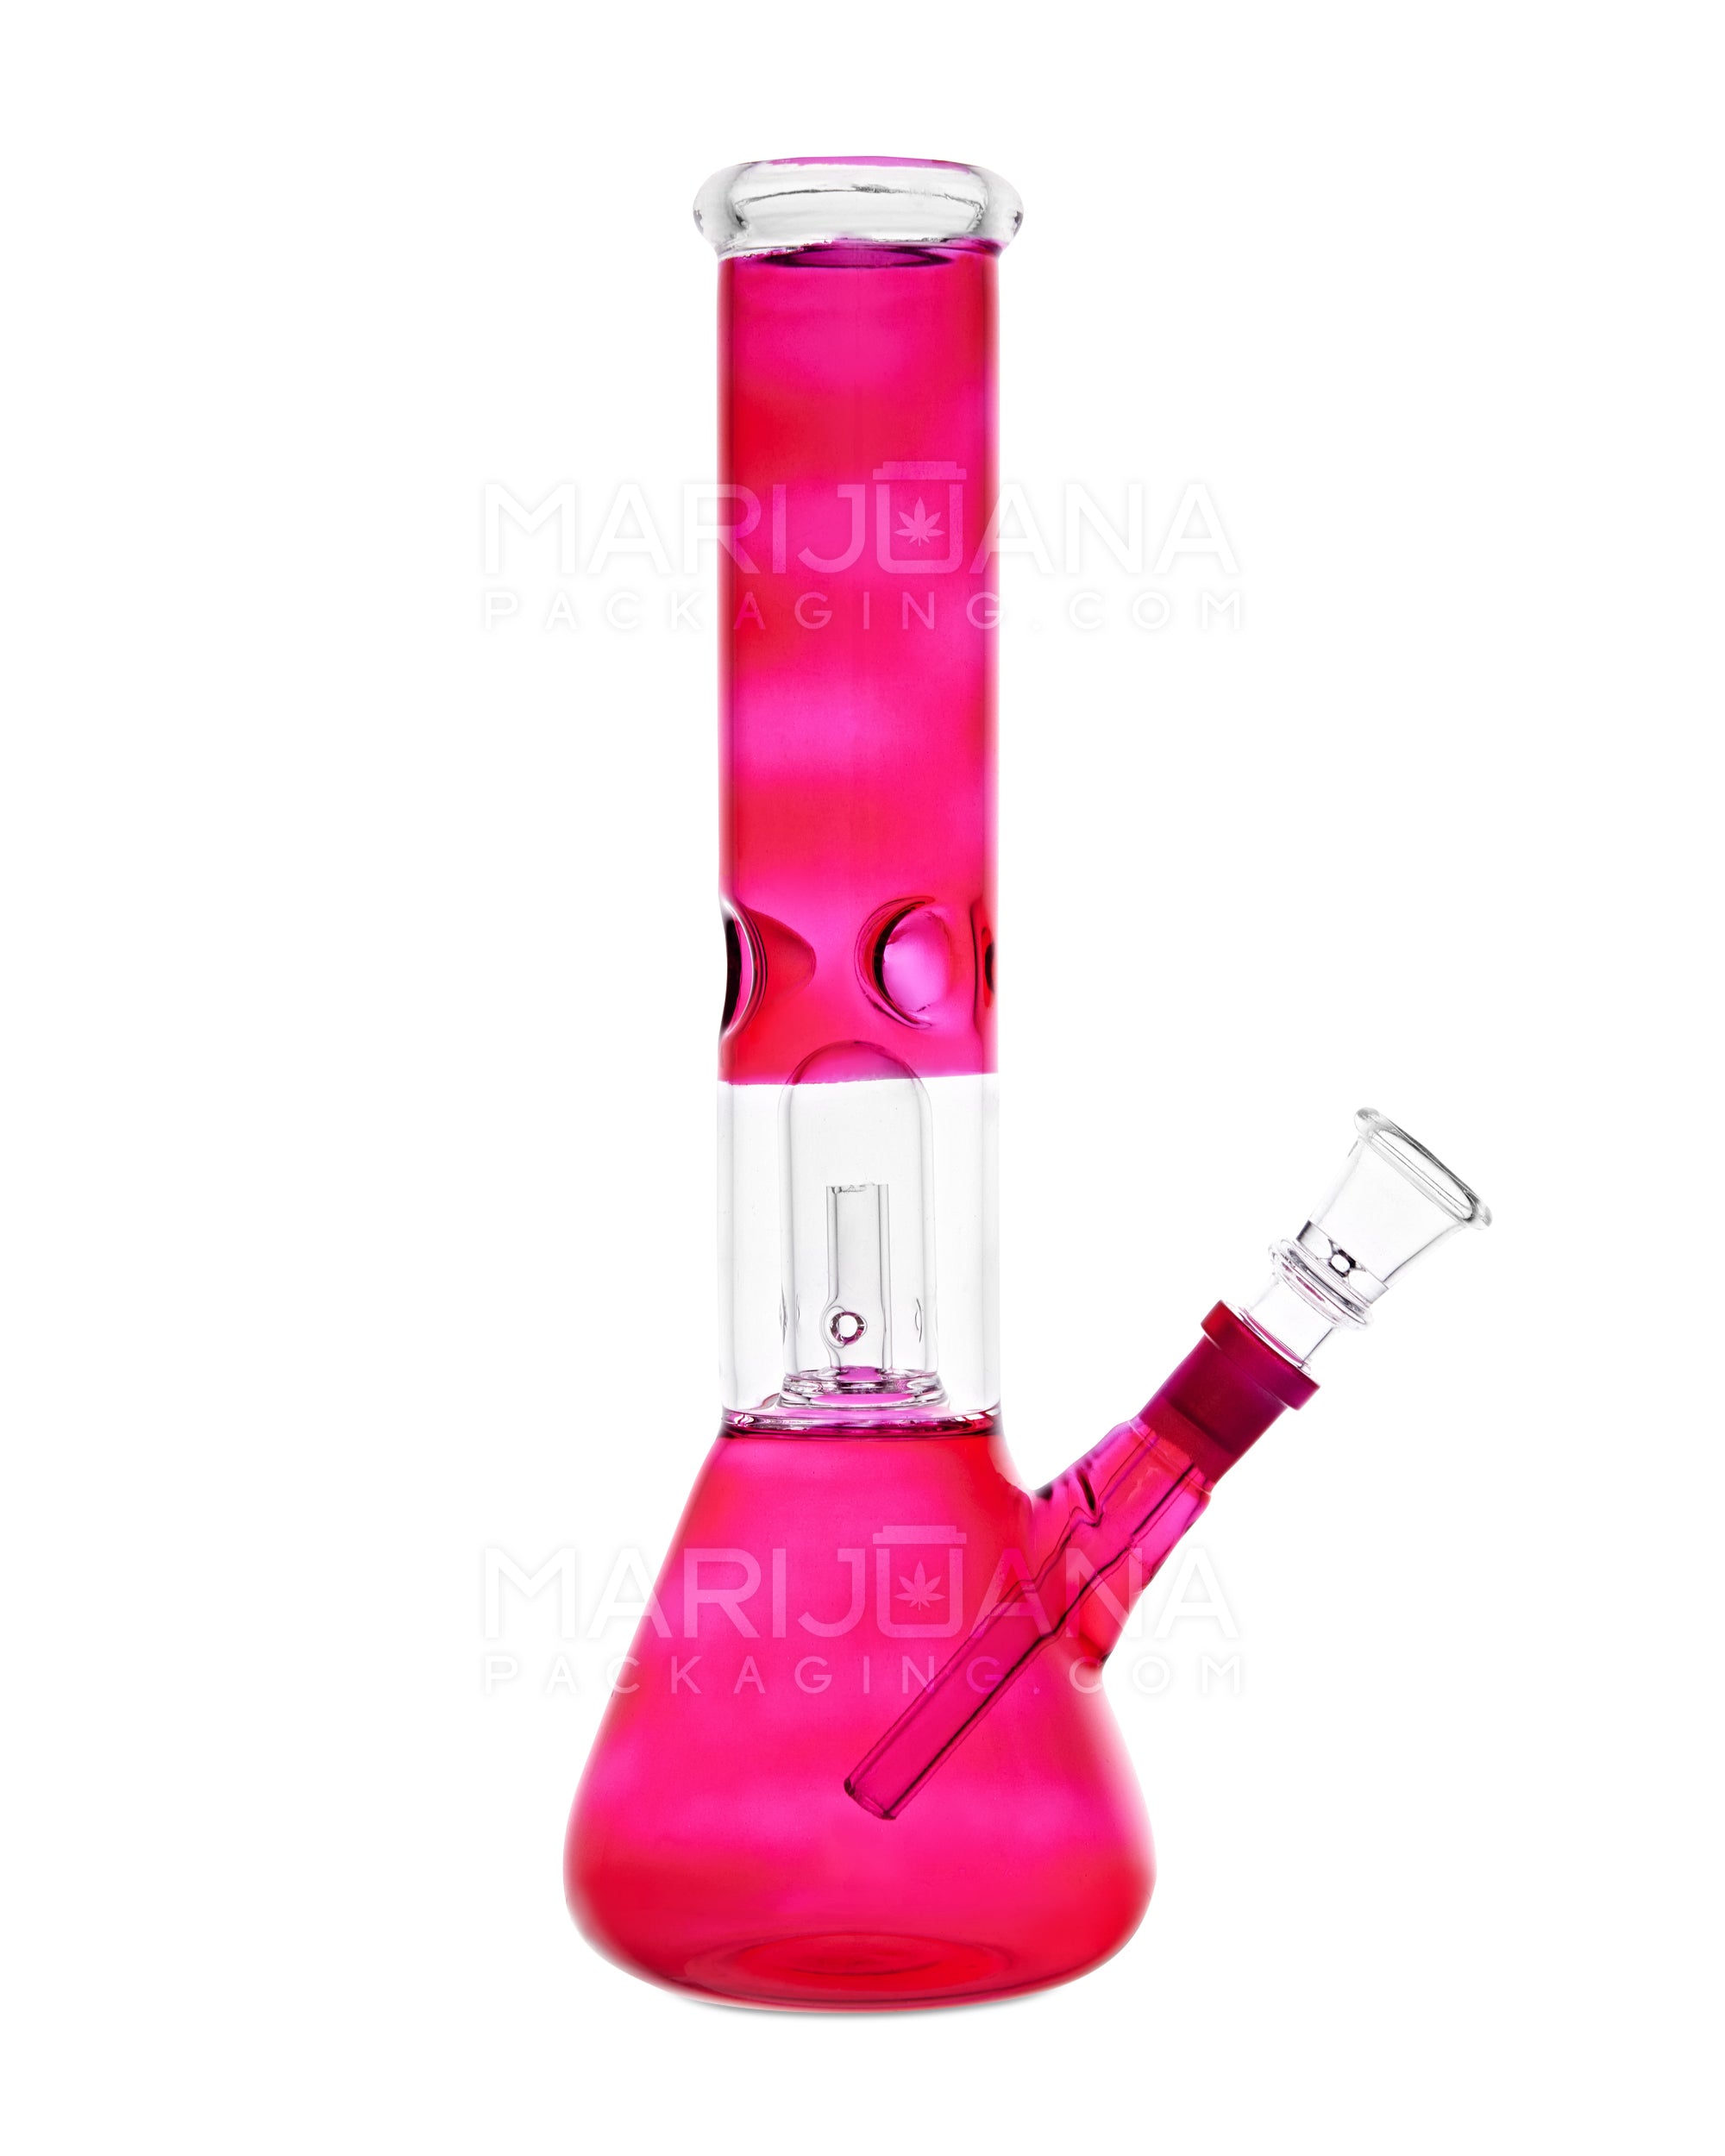 Straight Neck Showerhead Perc Glass Beaker Water Pipe w/ Ice Catcher | 10in Tall - 14mm Bowl - Red